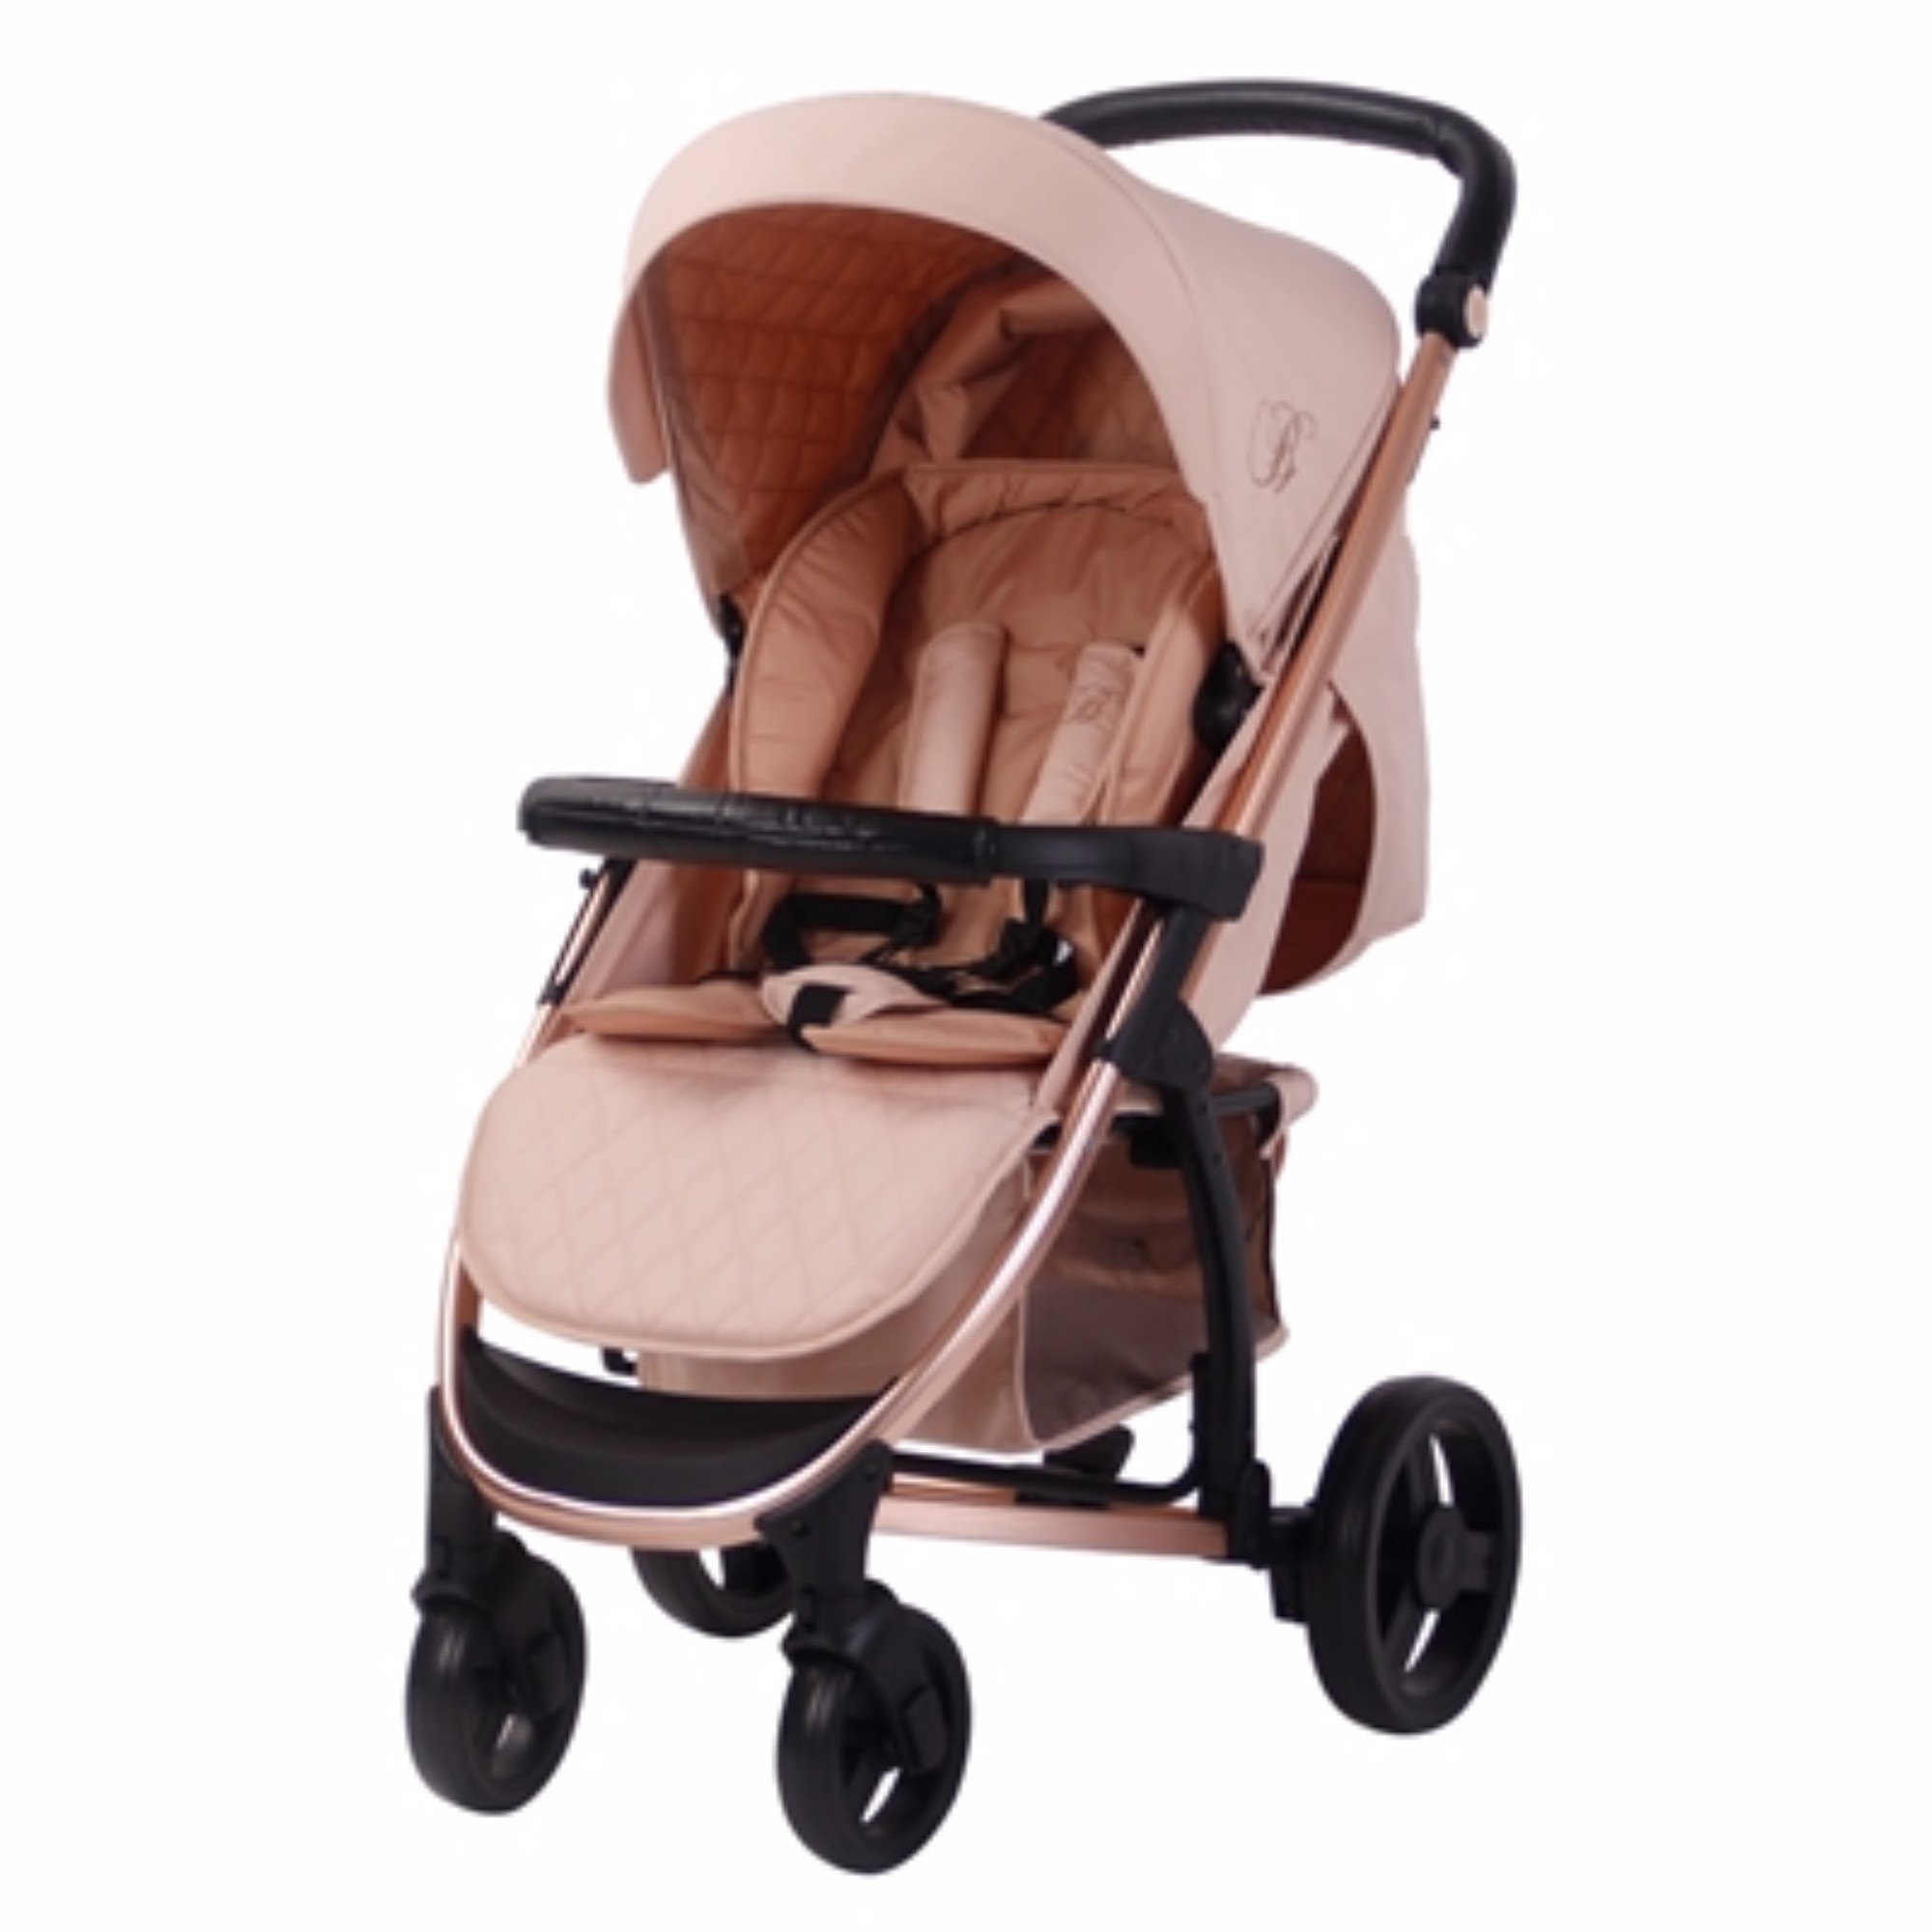 my babiie mb200 travel system reviews